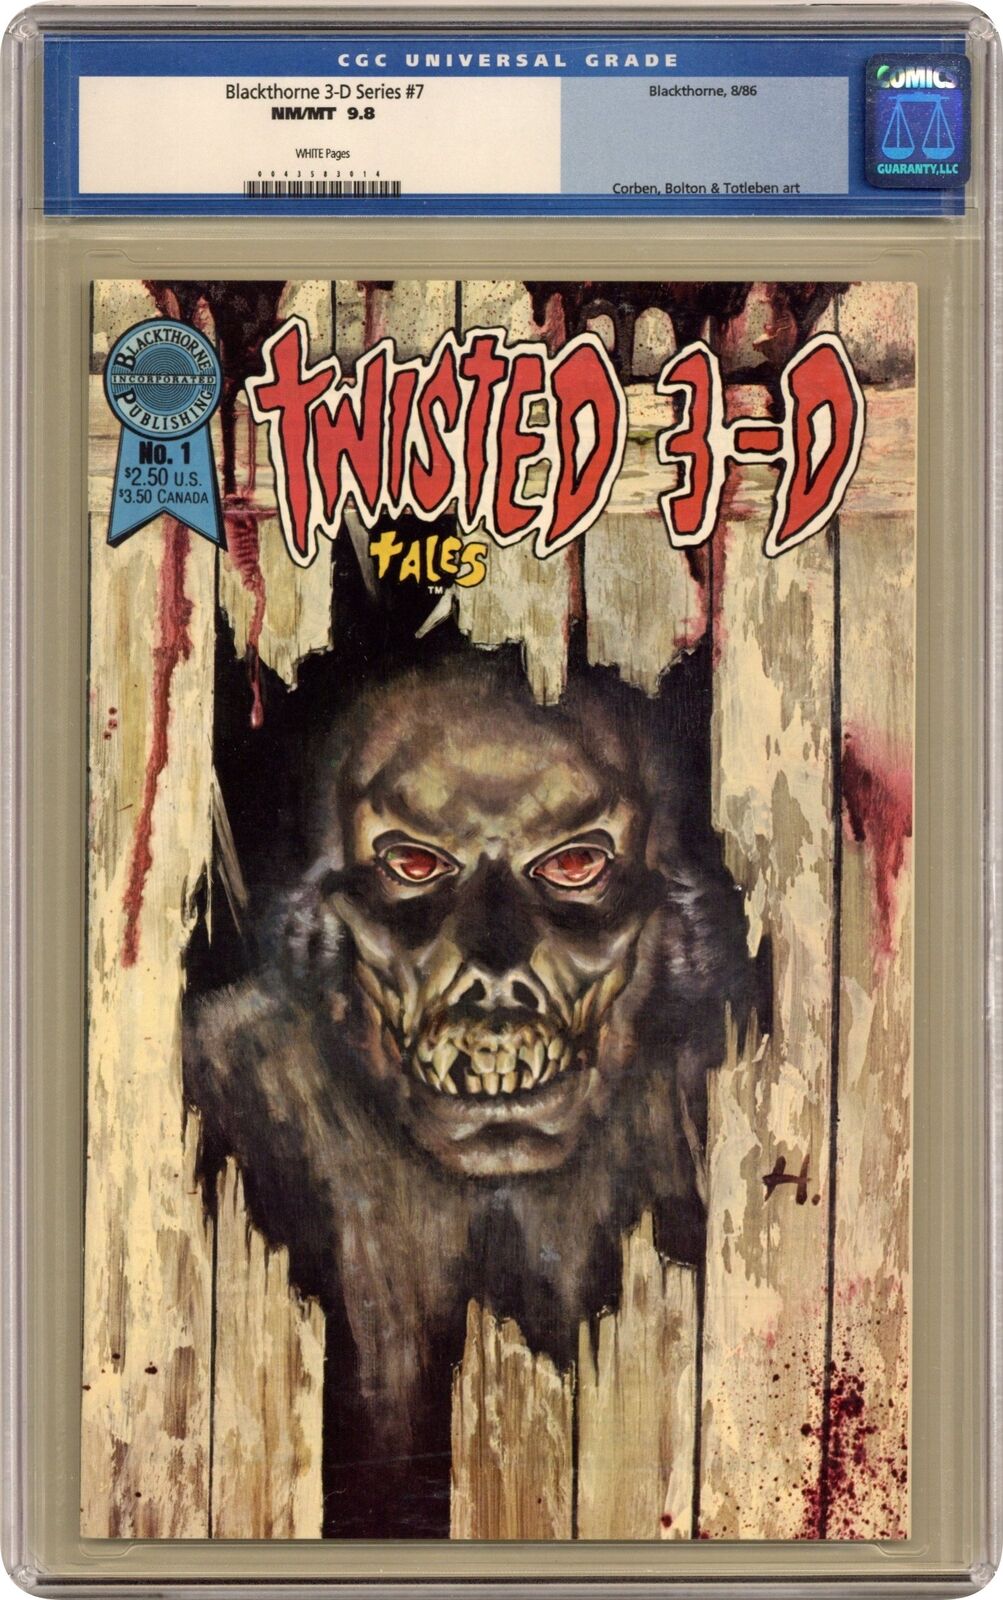 Twisted Tales 3-D #1 CGC 9.8 1996 0043583014